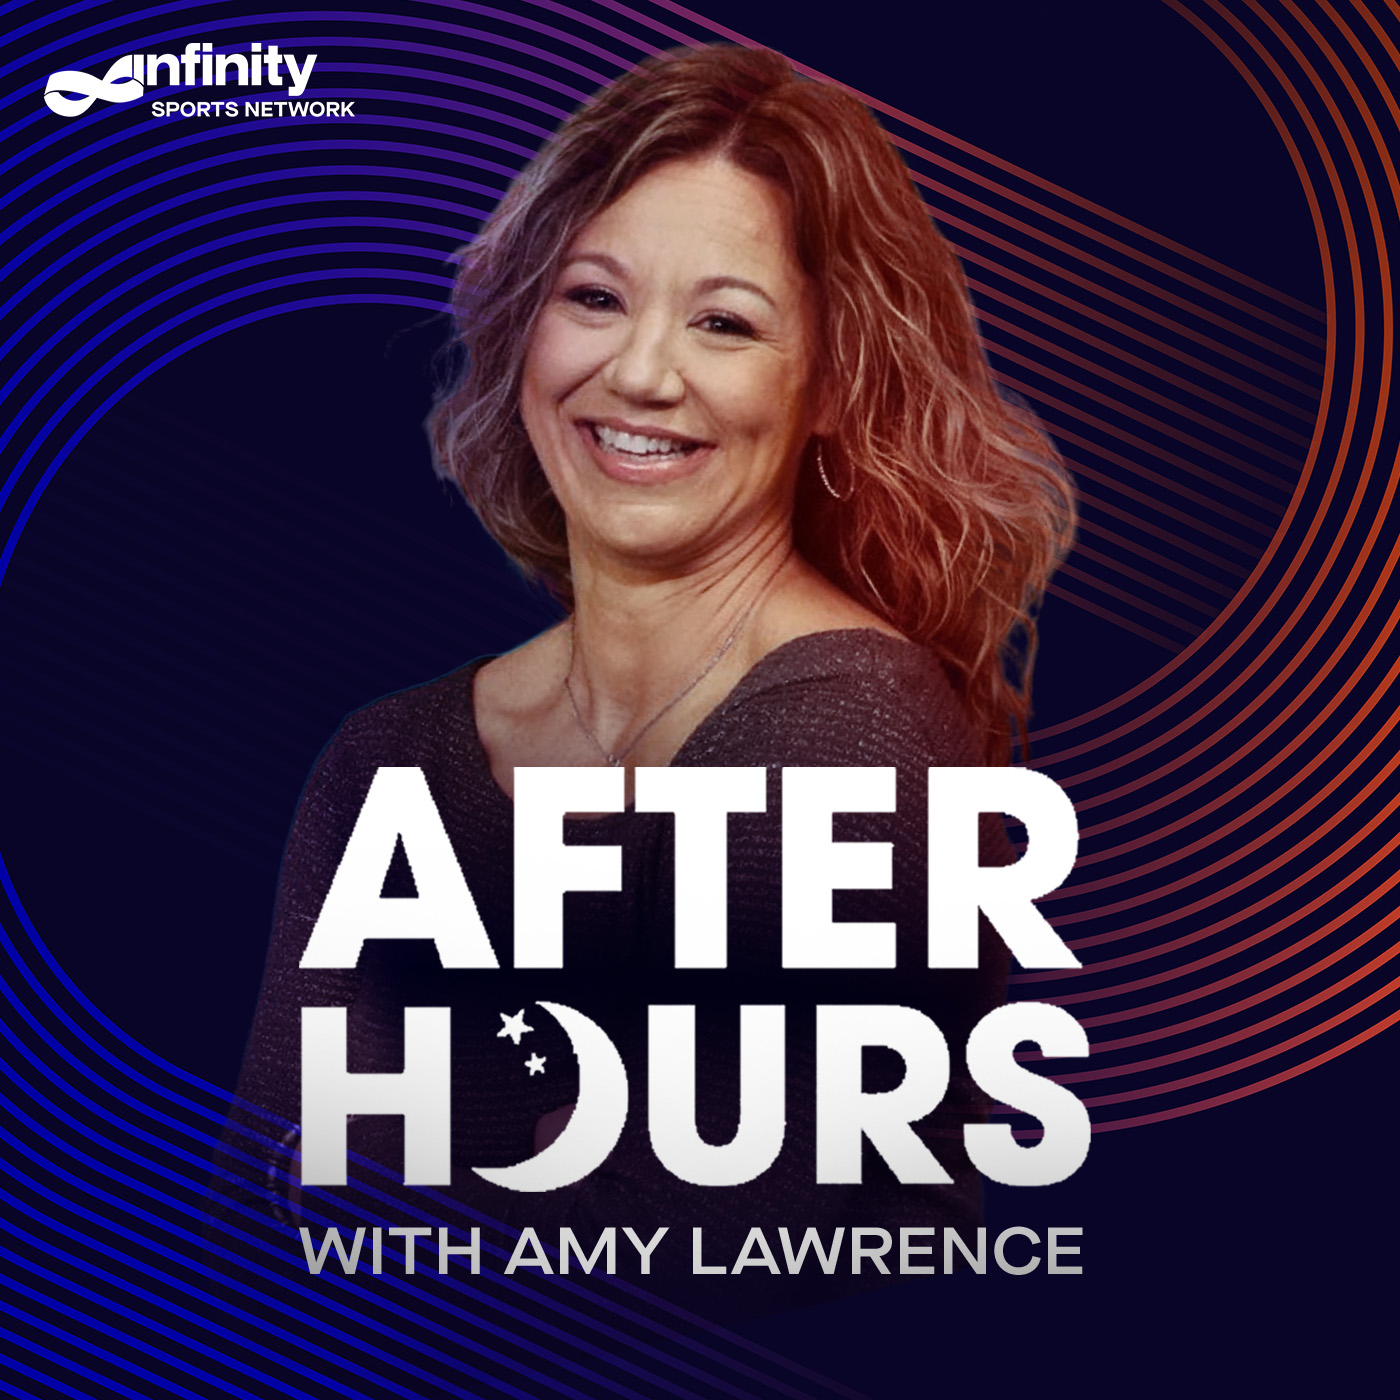 8-18-21 After Hours with Amy Lawrence PODCAST: Hour 1